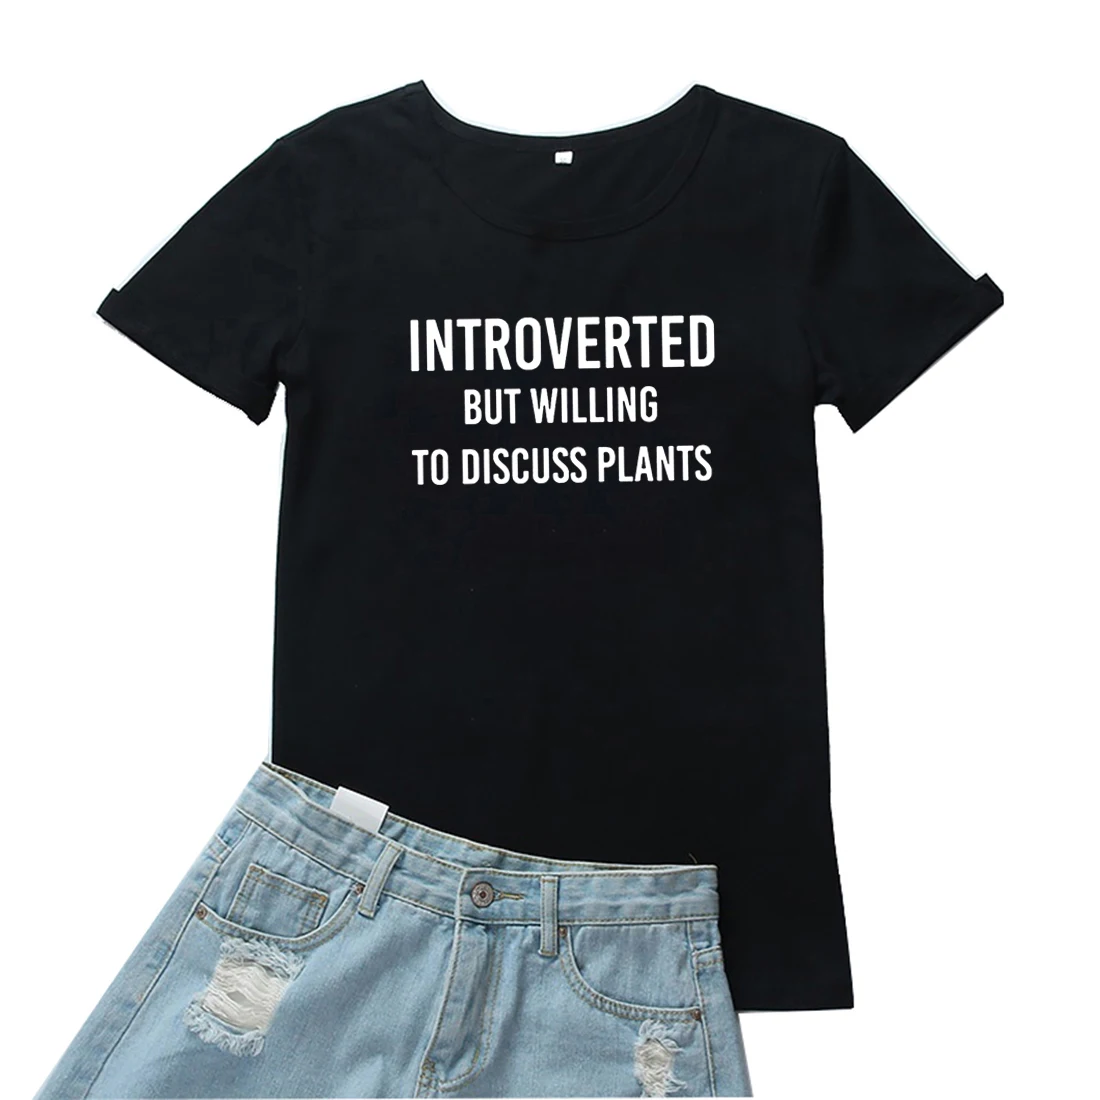 

Introverted But Willing To Discuss Plants T Shirt Women Fashion Letter Print Tee Shirt Femme Casual Cotton Black Camisetas Mujer